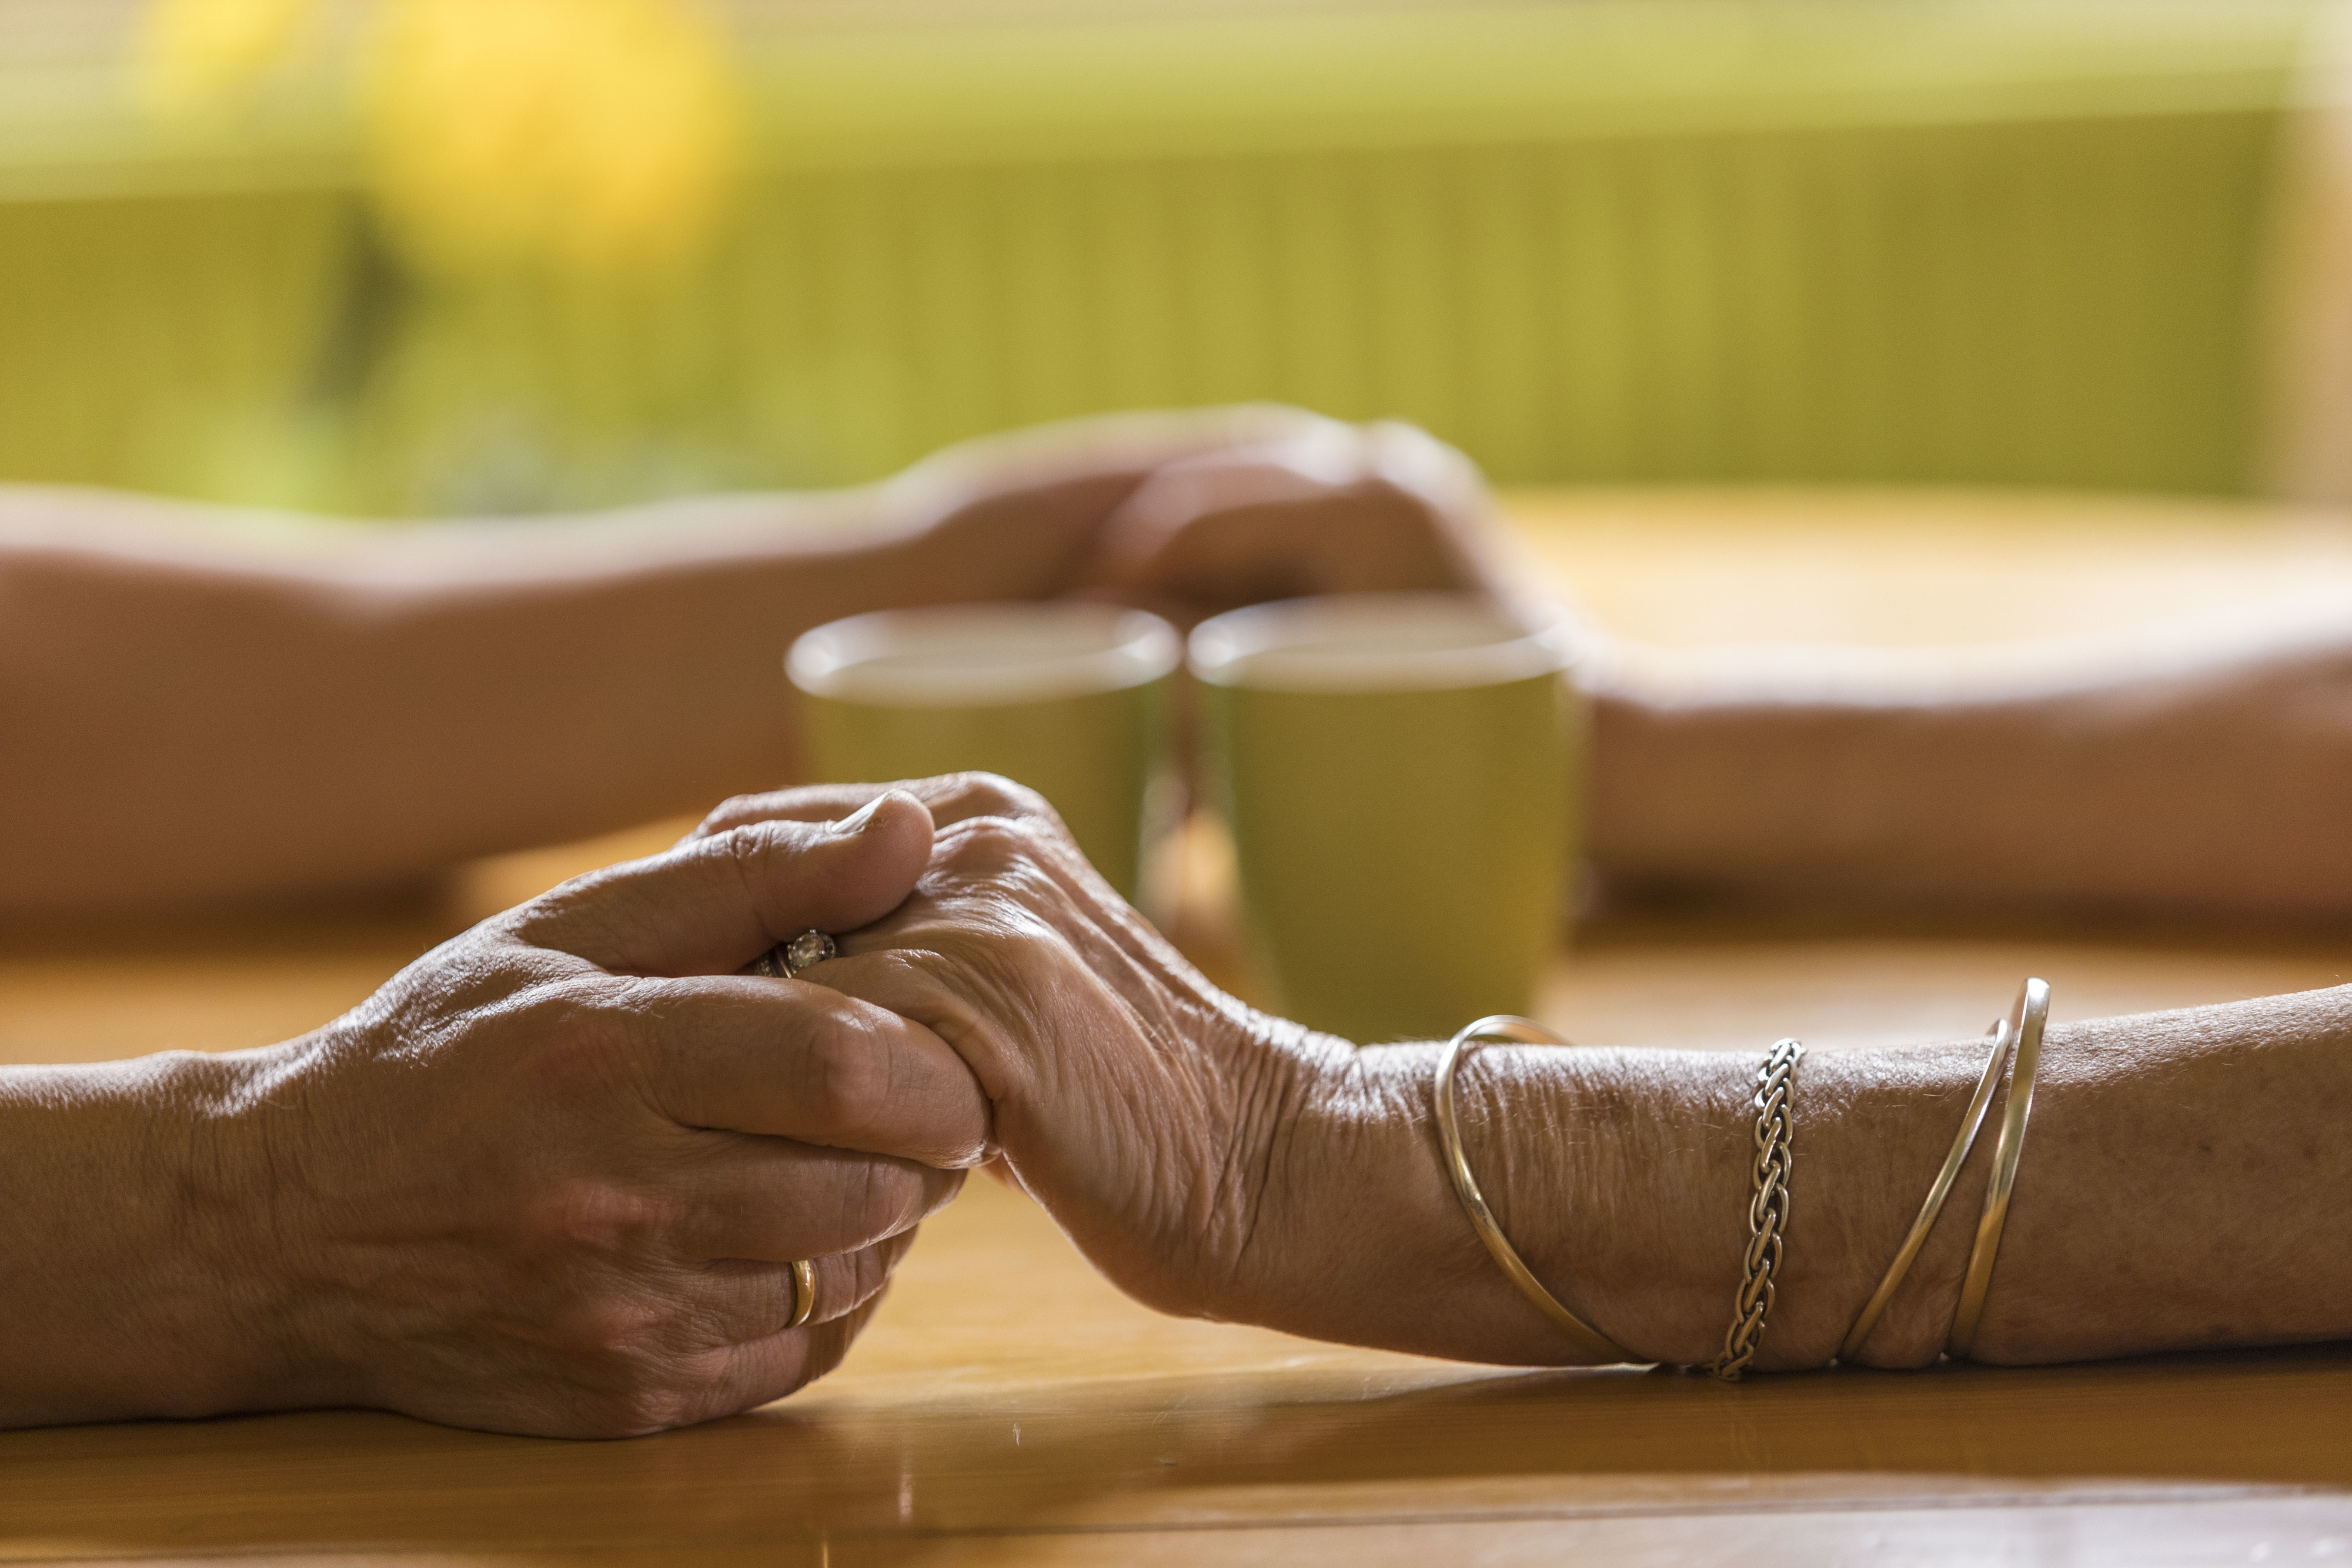 Two people holding hands across a table with mugs nearby, signifying a close relationship